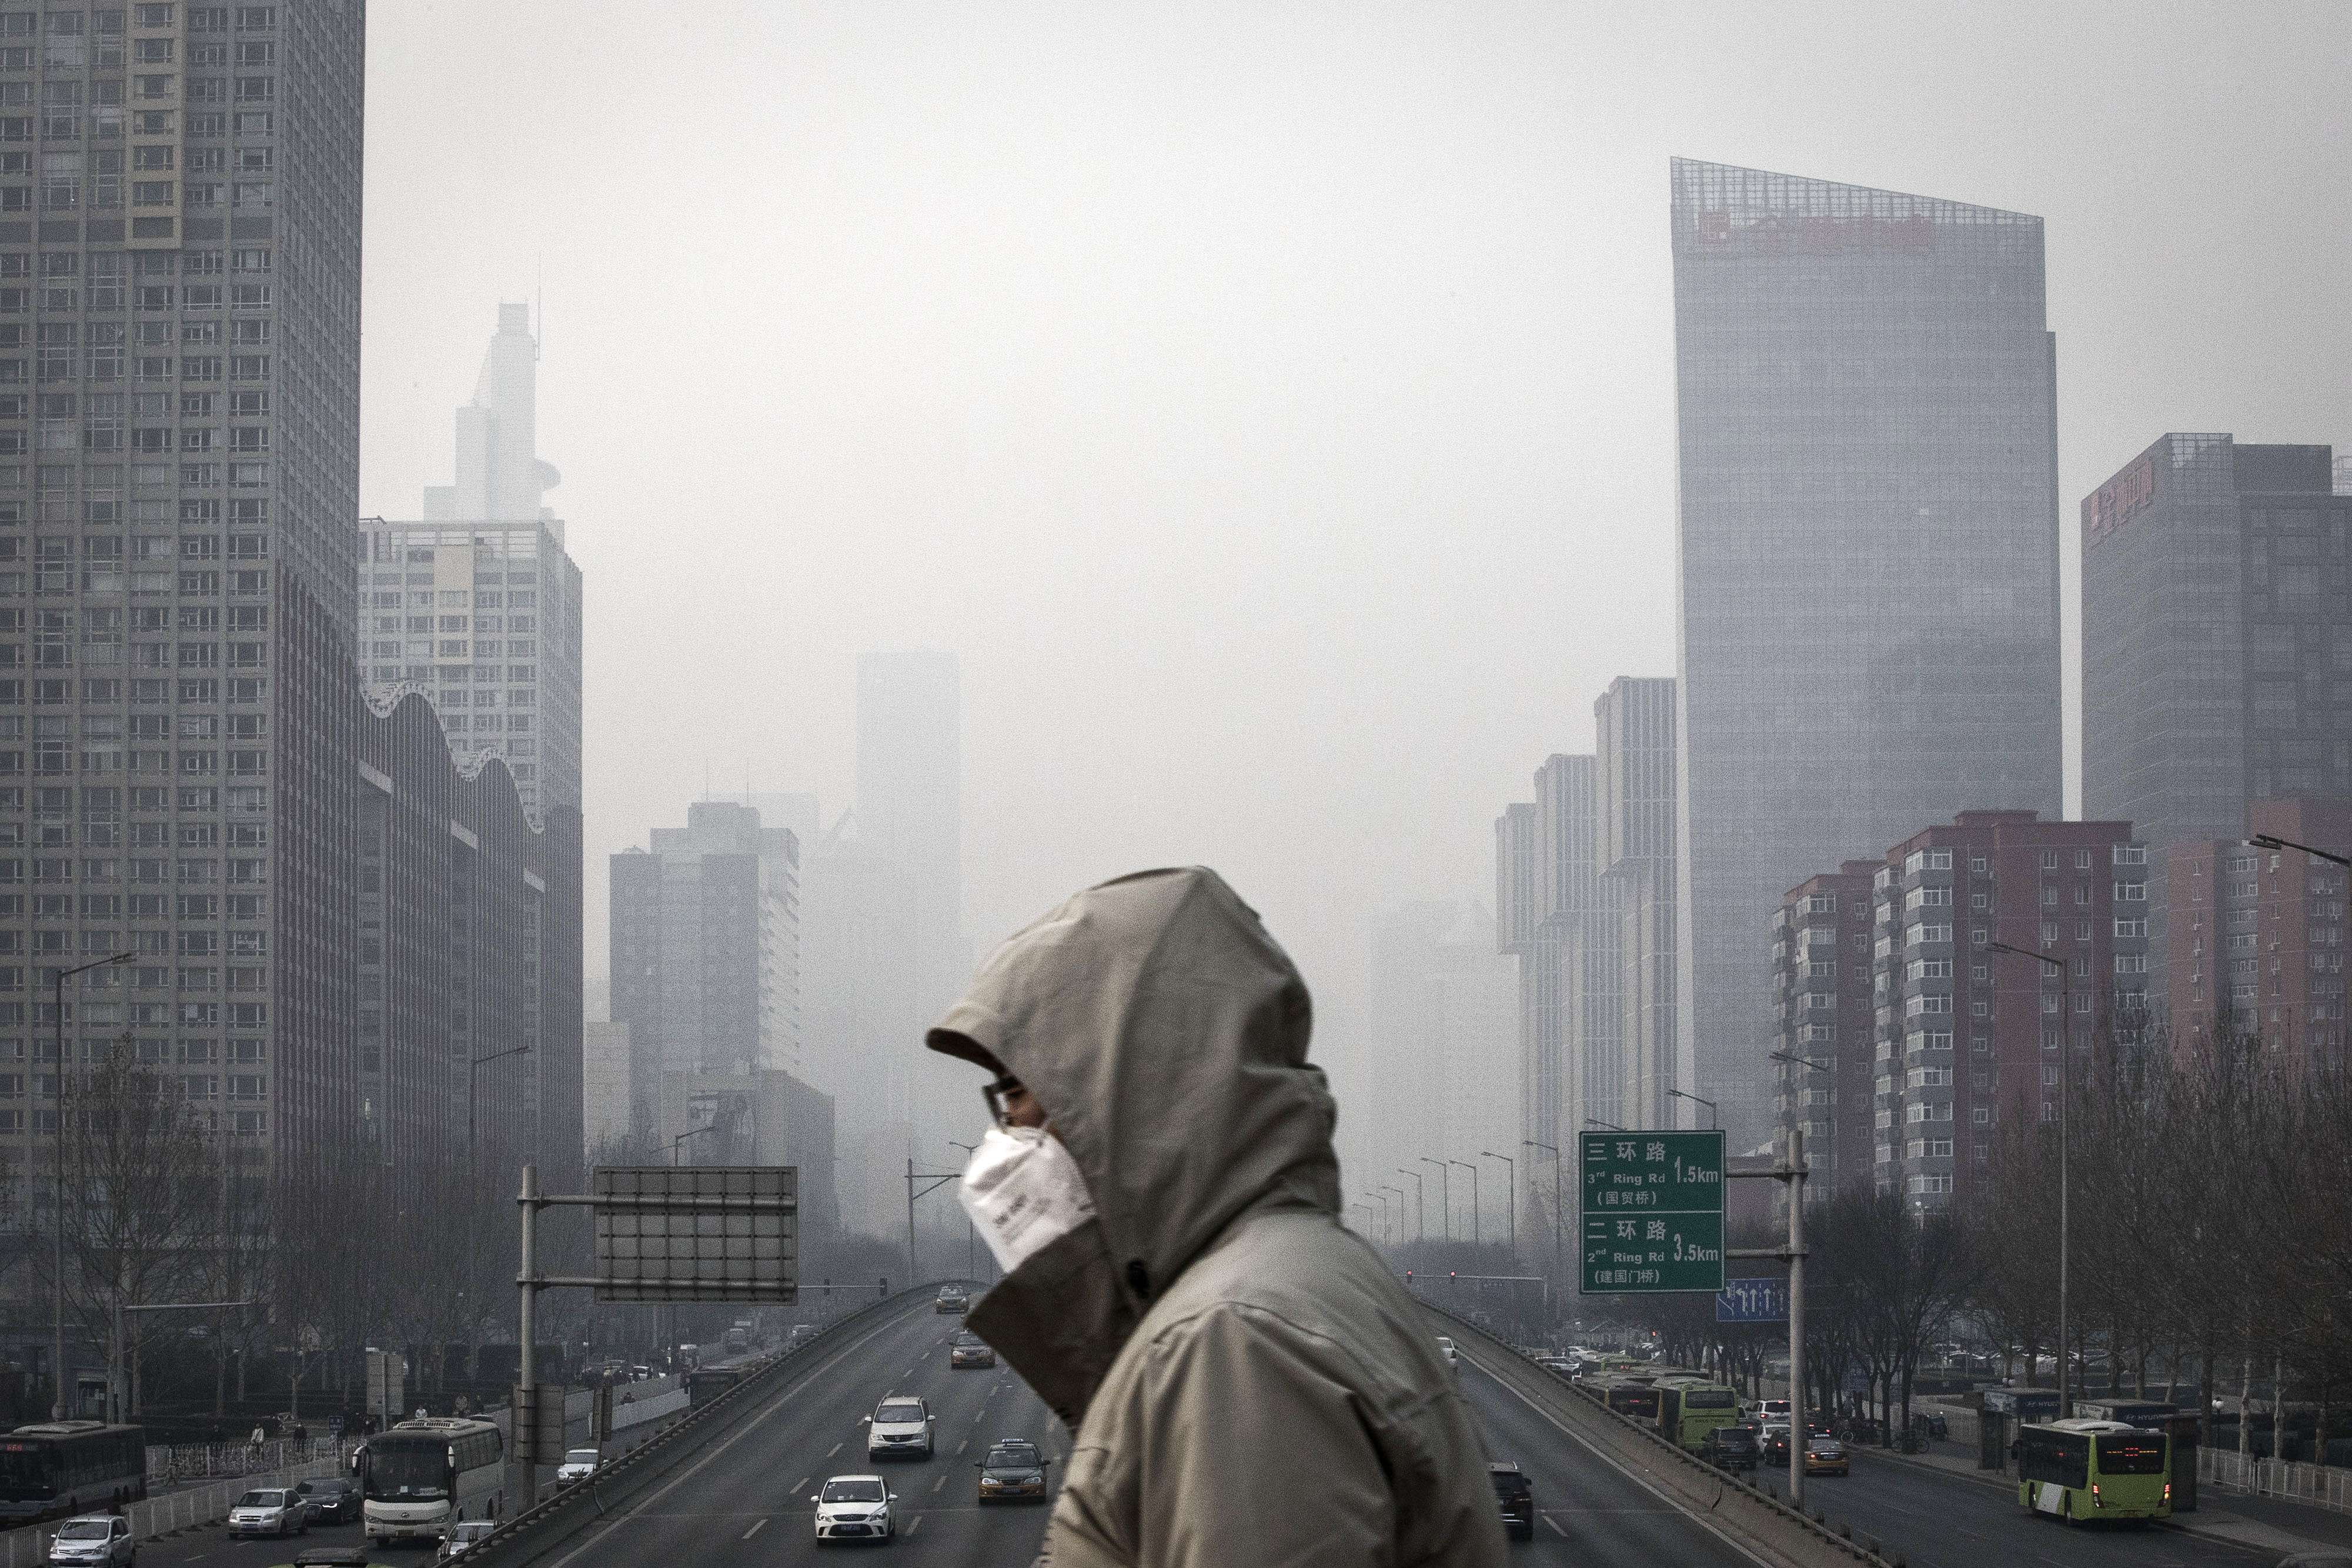 A man wearing a face mask walks on a footbridge as buildings shrouded in haze stands in the background in Beijing, China, on Friday, Jan. 6, 2017. Toxic haze that settled over much of China during the last three weeks has triggered a flight reflex among residents, leading to the rising popularity of smog avoidance travel packages to far-flung locations such as Iceland and Antarctica. Photo: Bloomberg